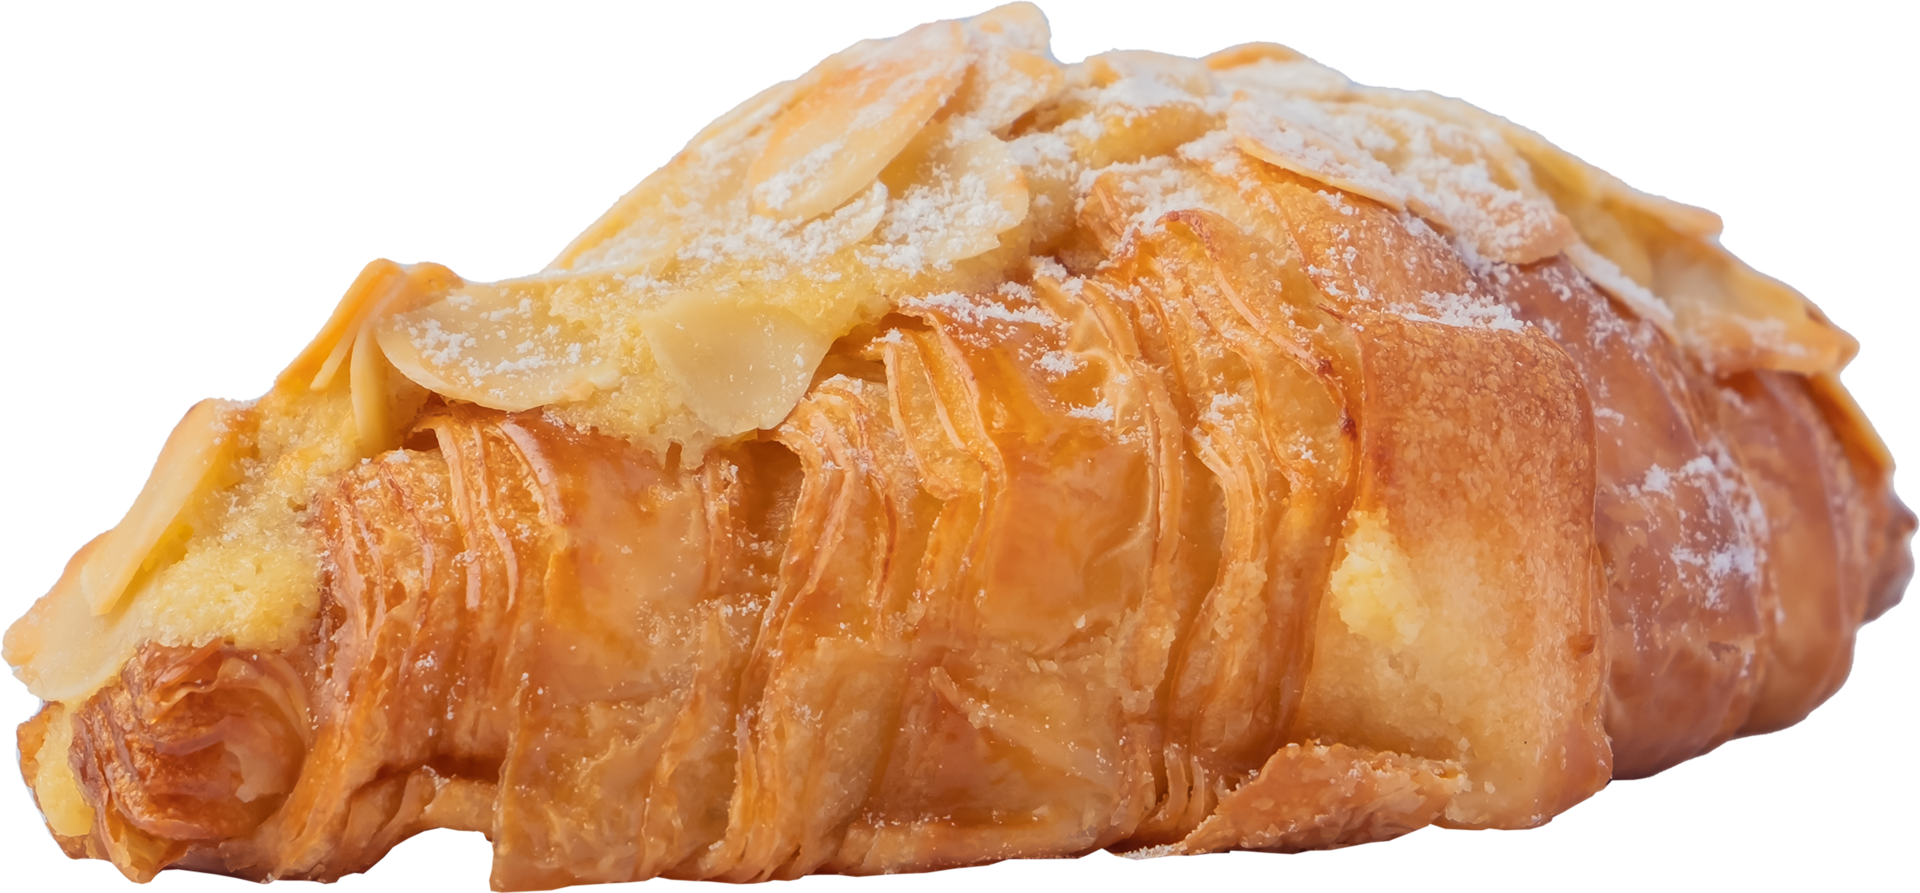 knipsel croissant brood op transparante achtergrond. png